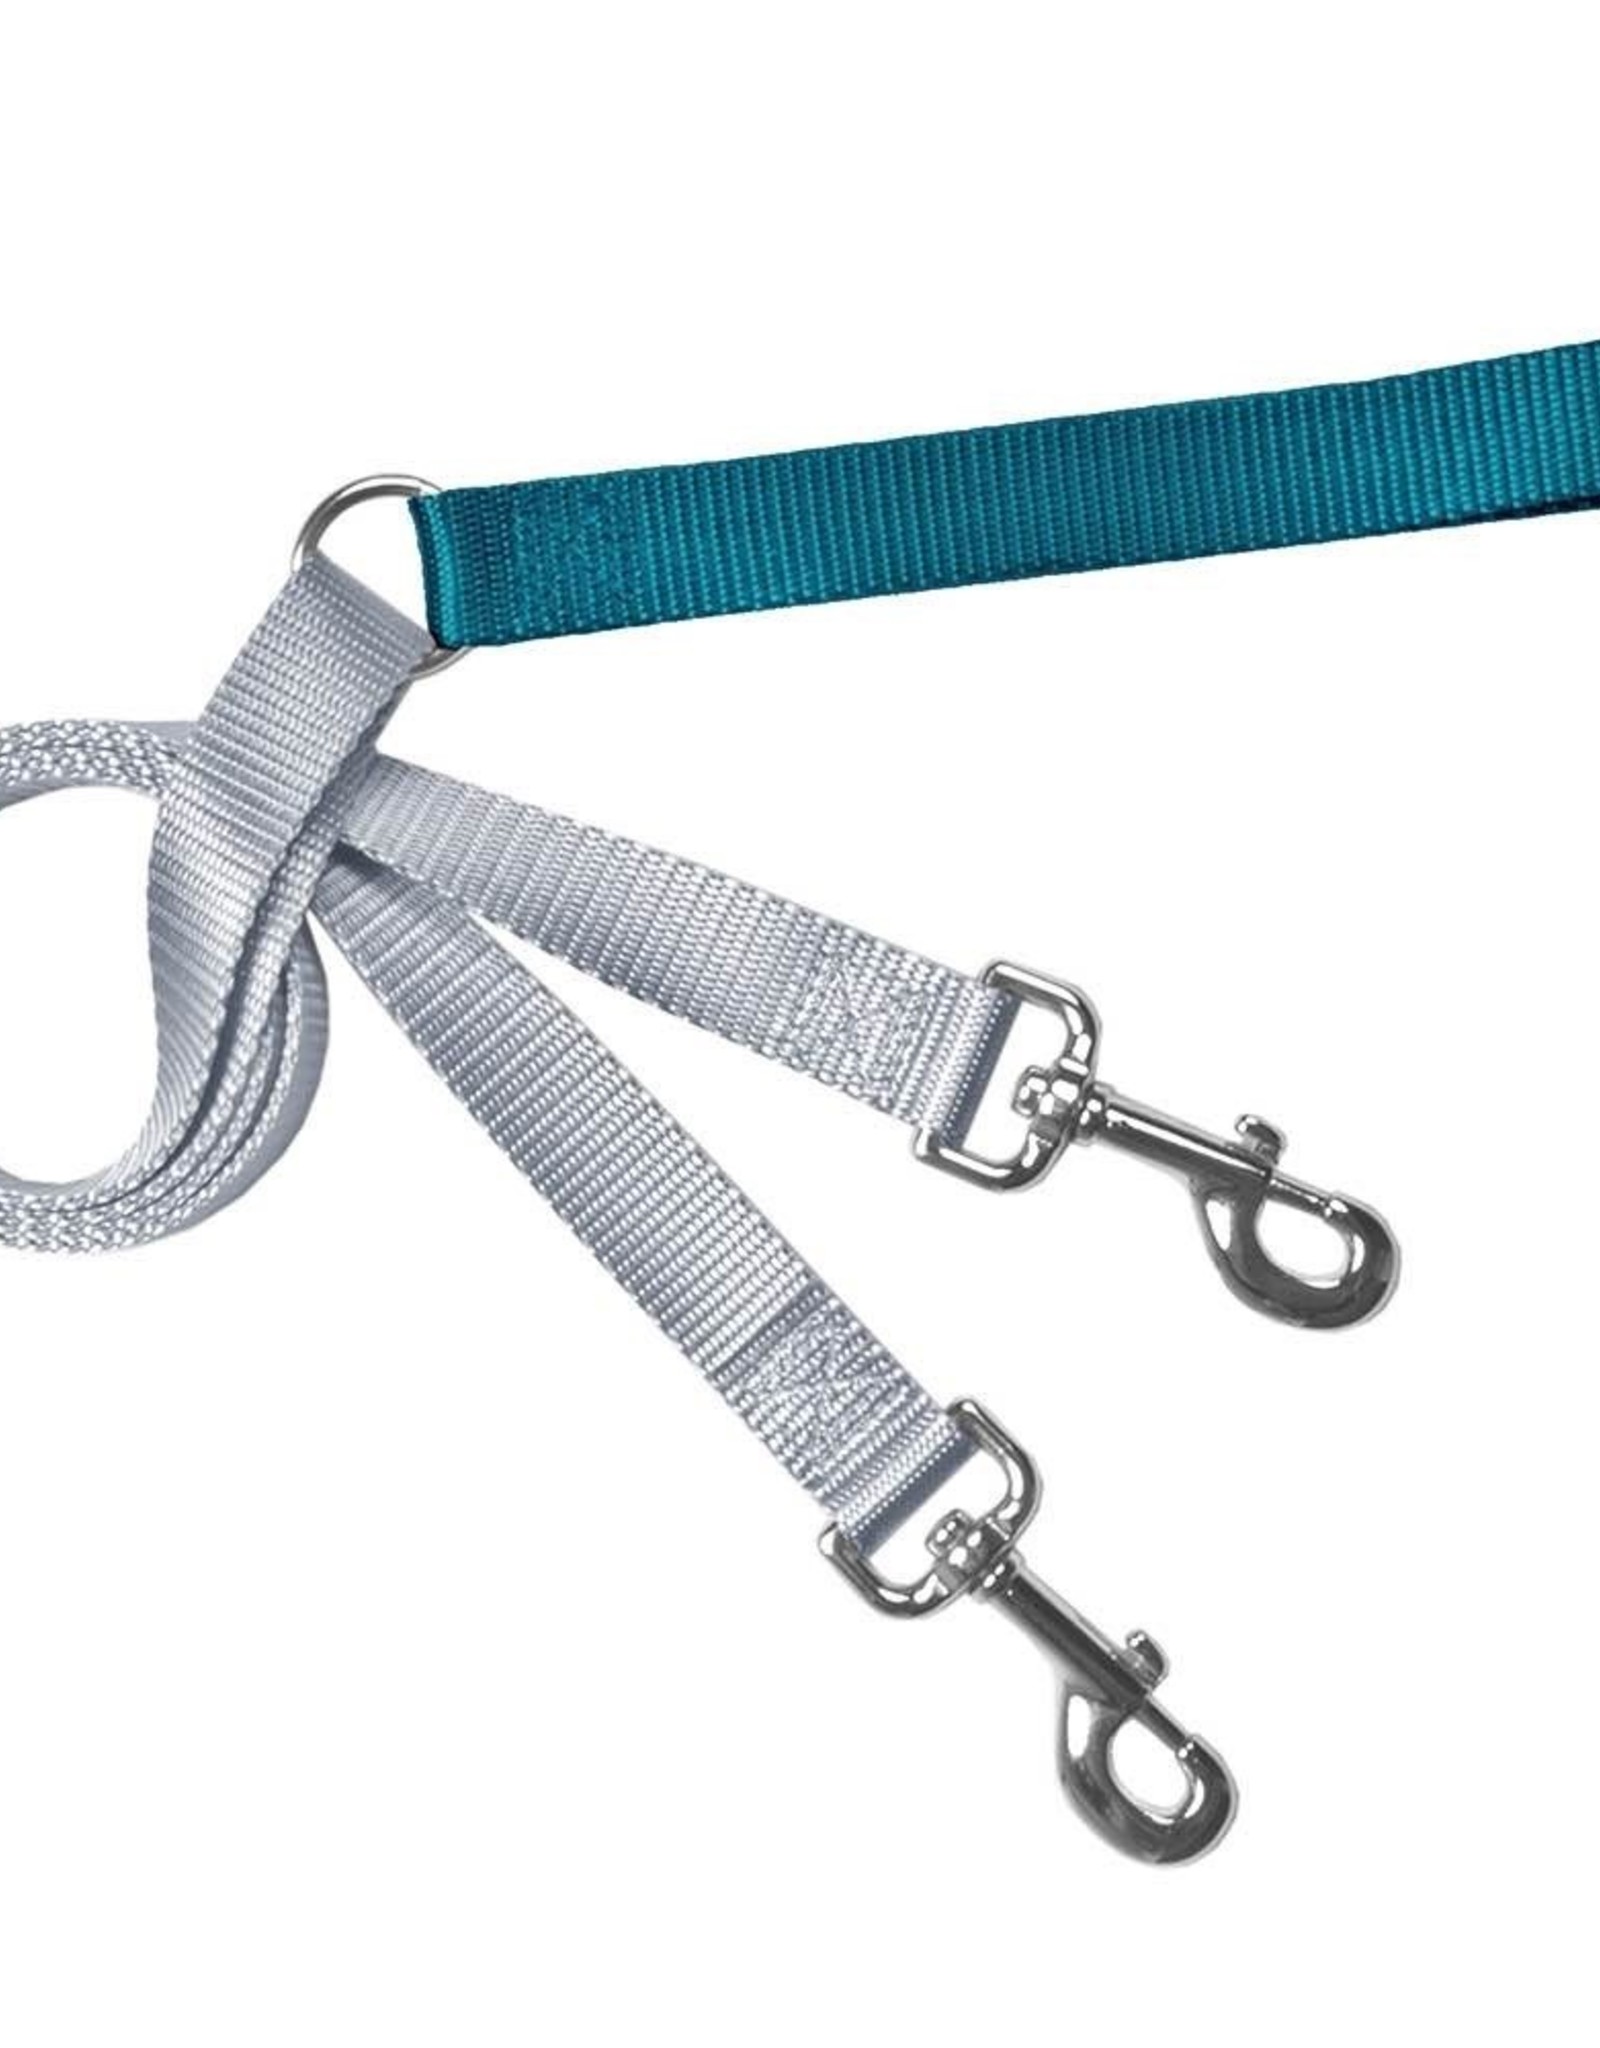 2 Hounds Design 1" Freedom Harness and Leash - Teal